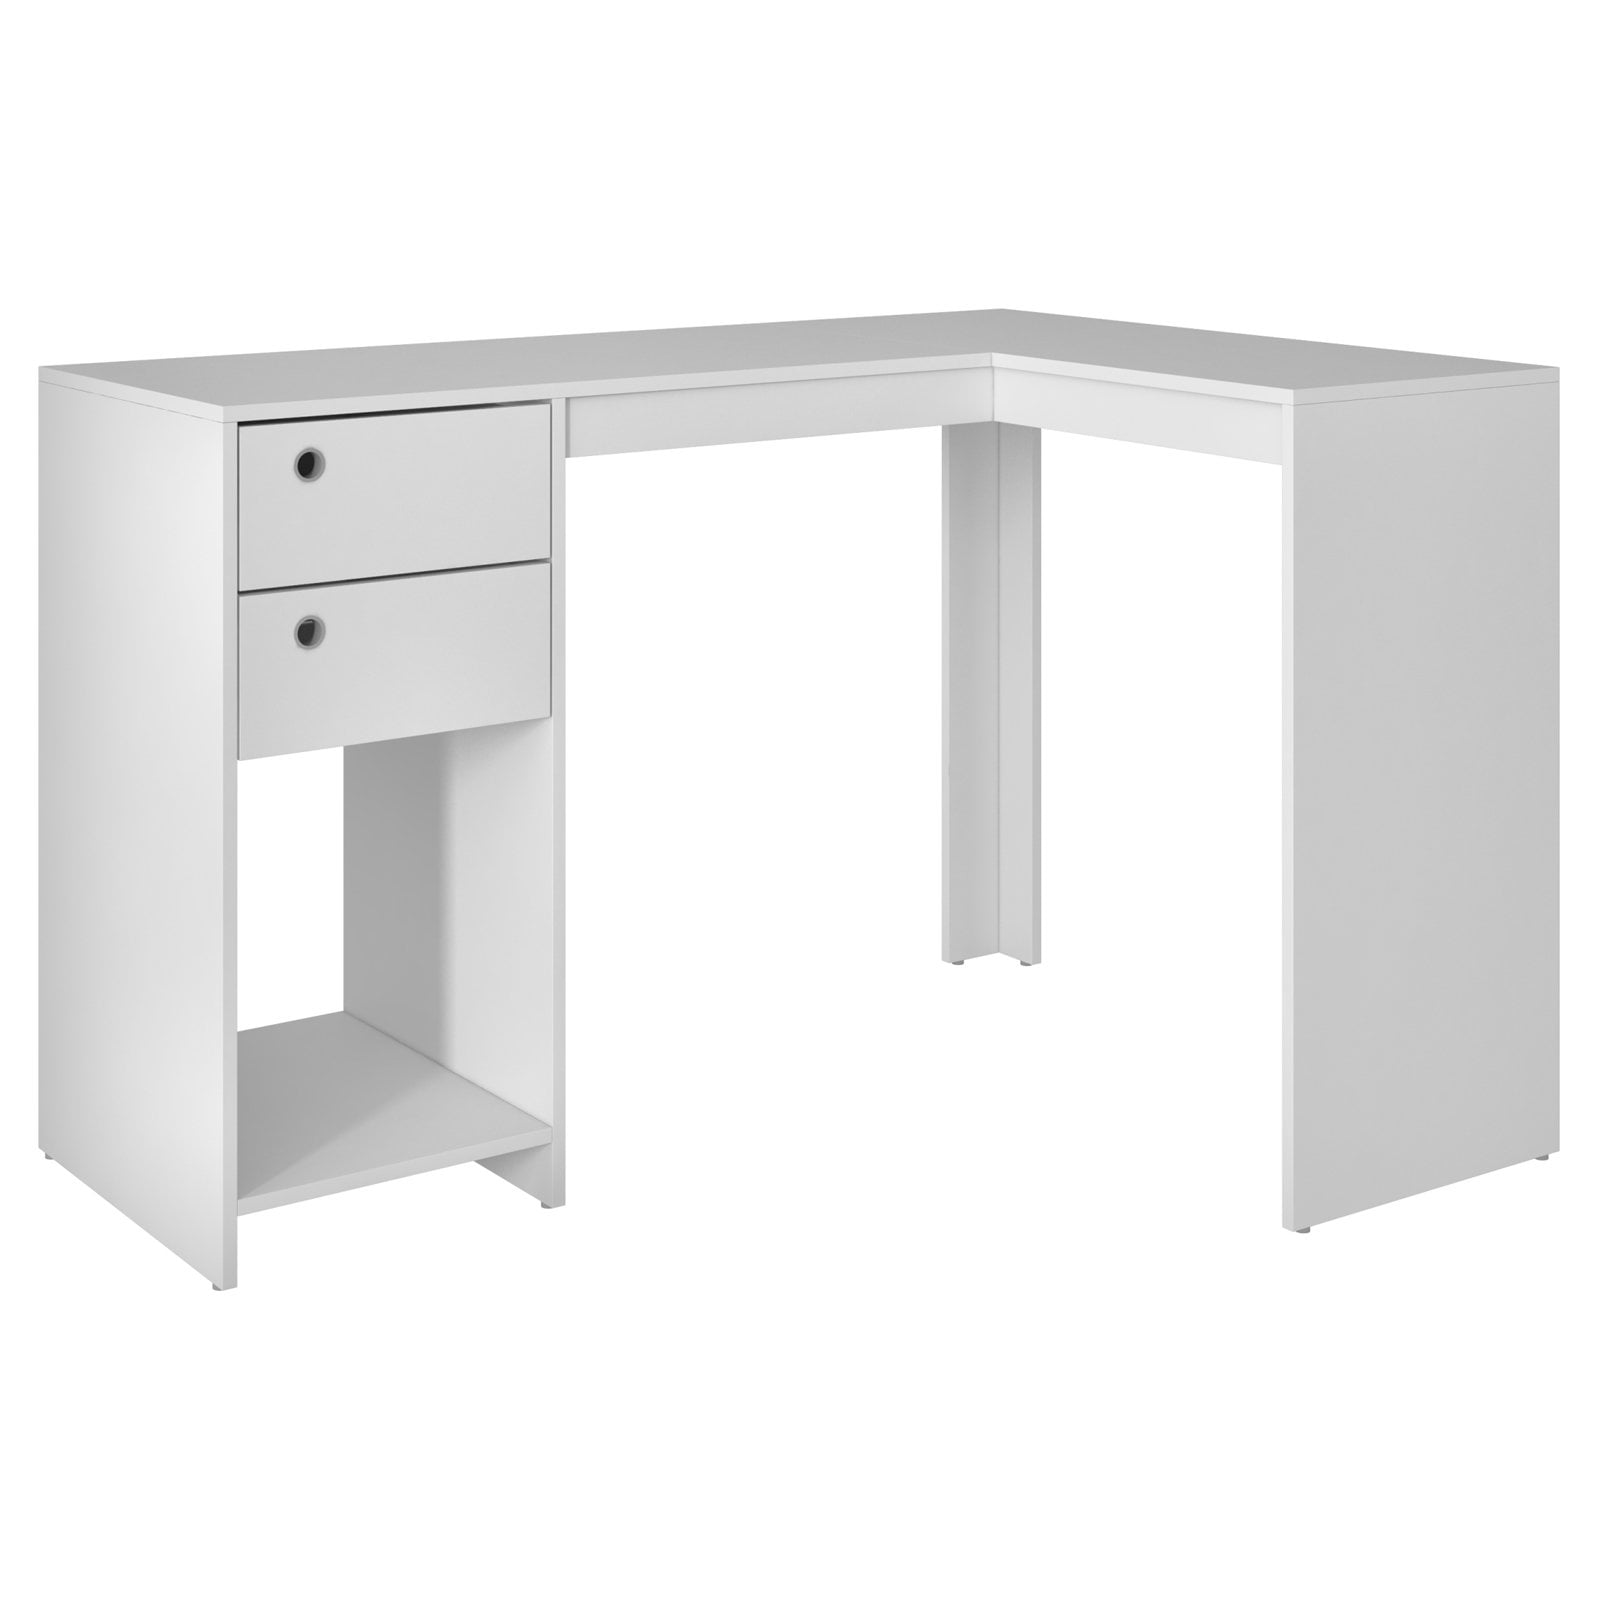 Picture of Manhattan Comfort 41AMC6 Accentuations by Modest Palermo Classic L-Shaped Desk with 2 Drawers & 1 Cubby in White